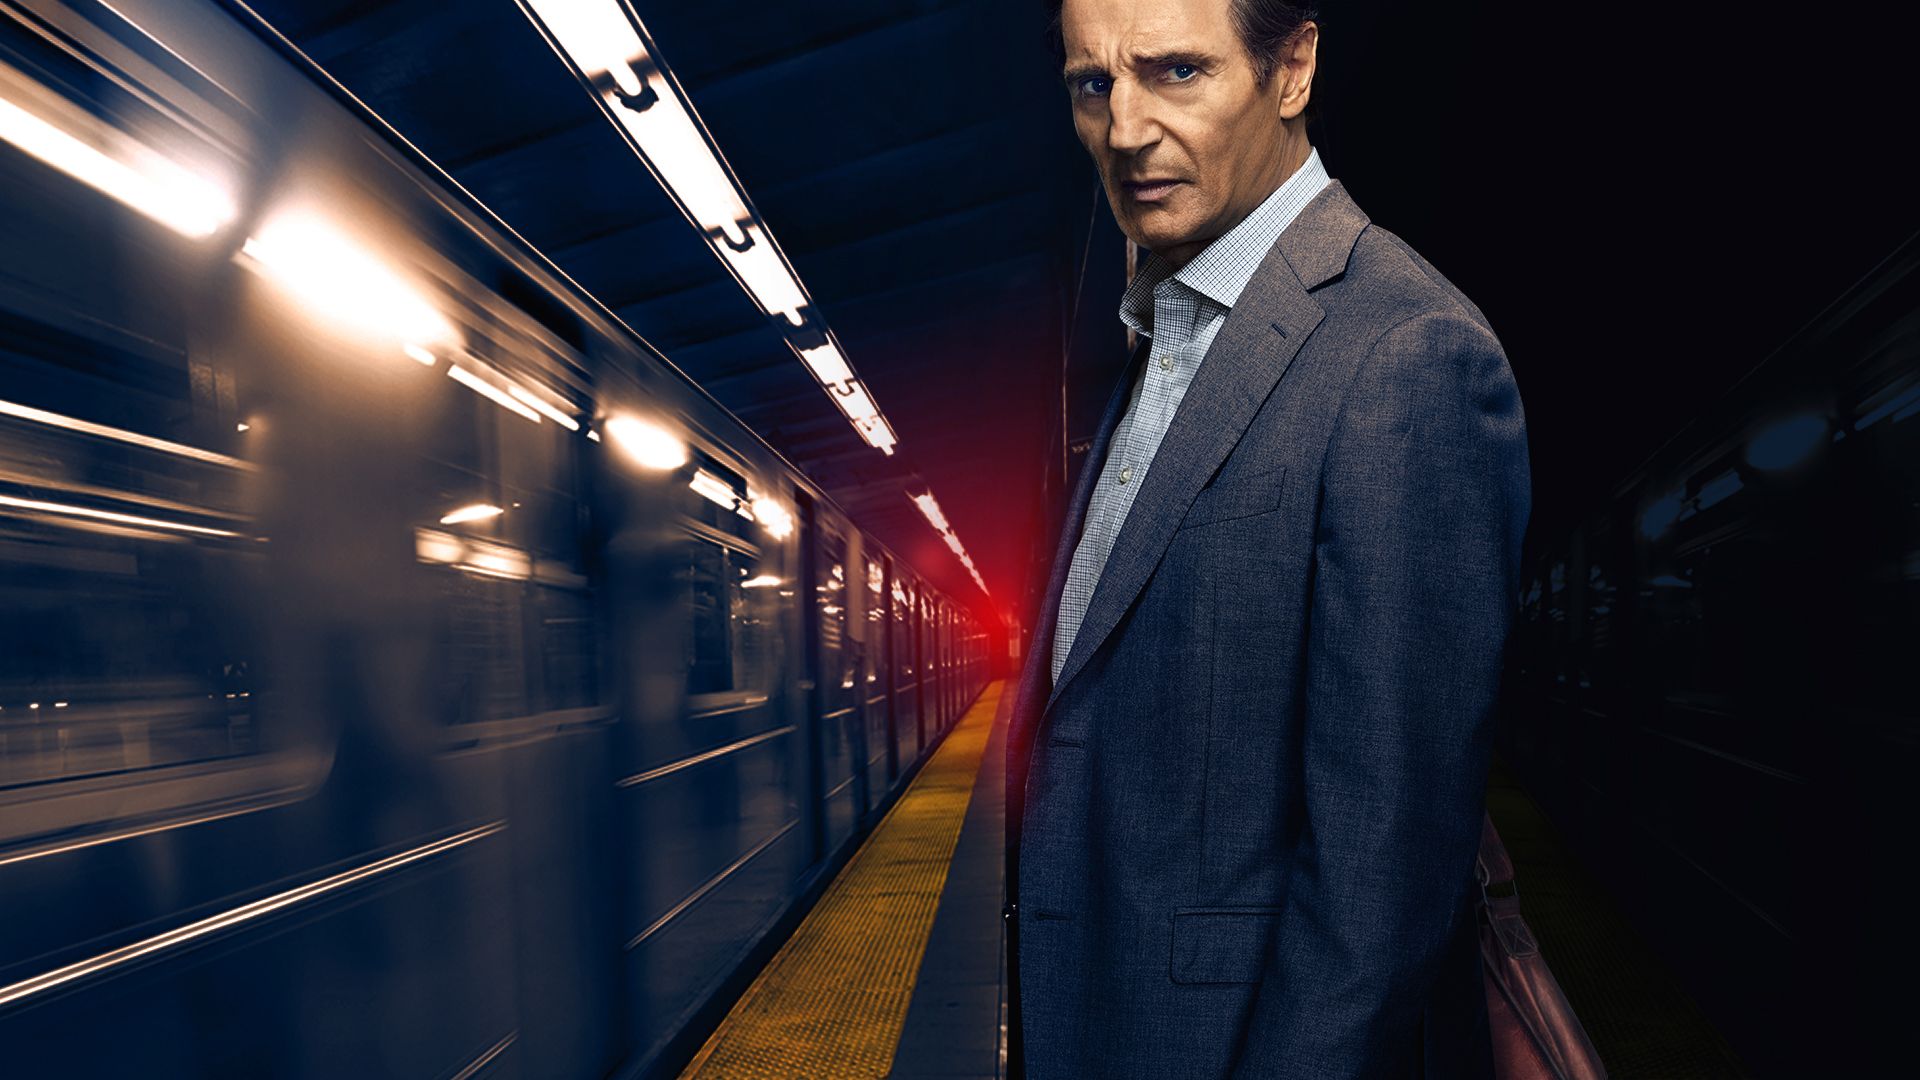 The Commuter background